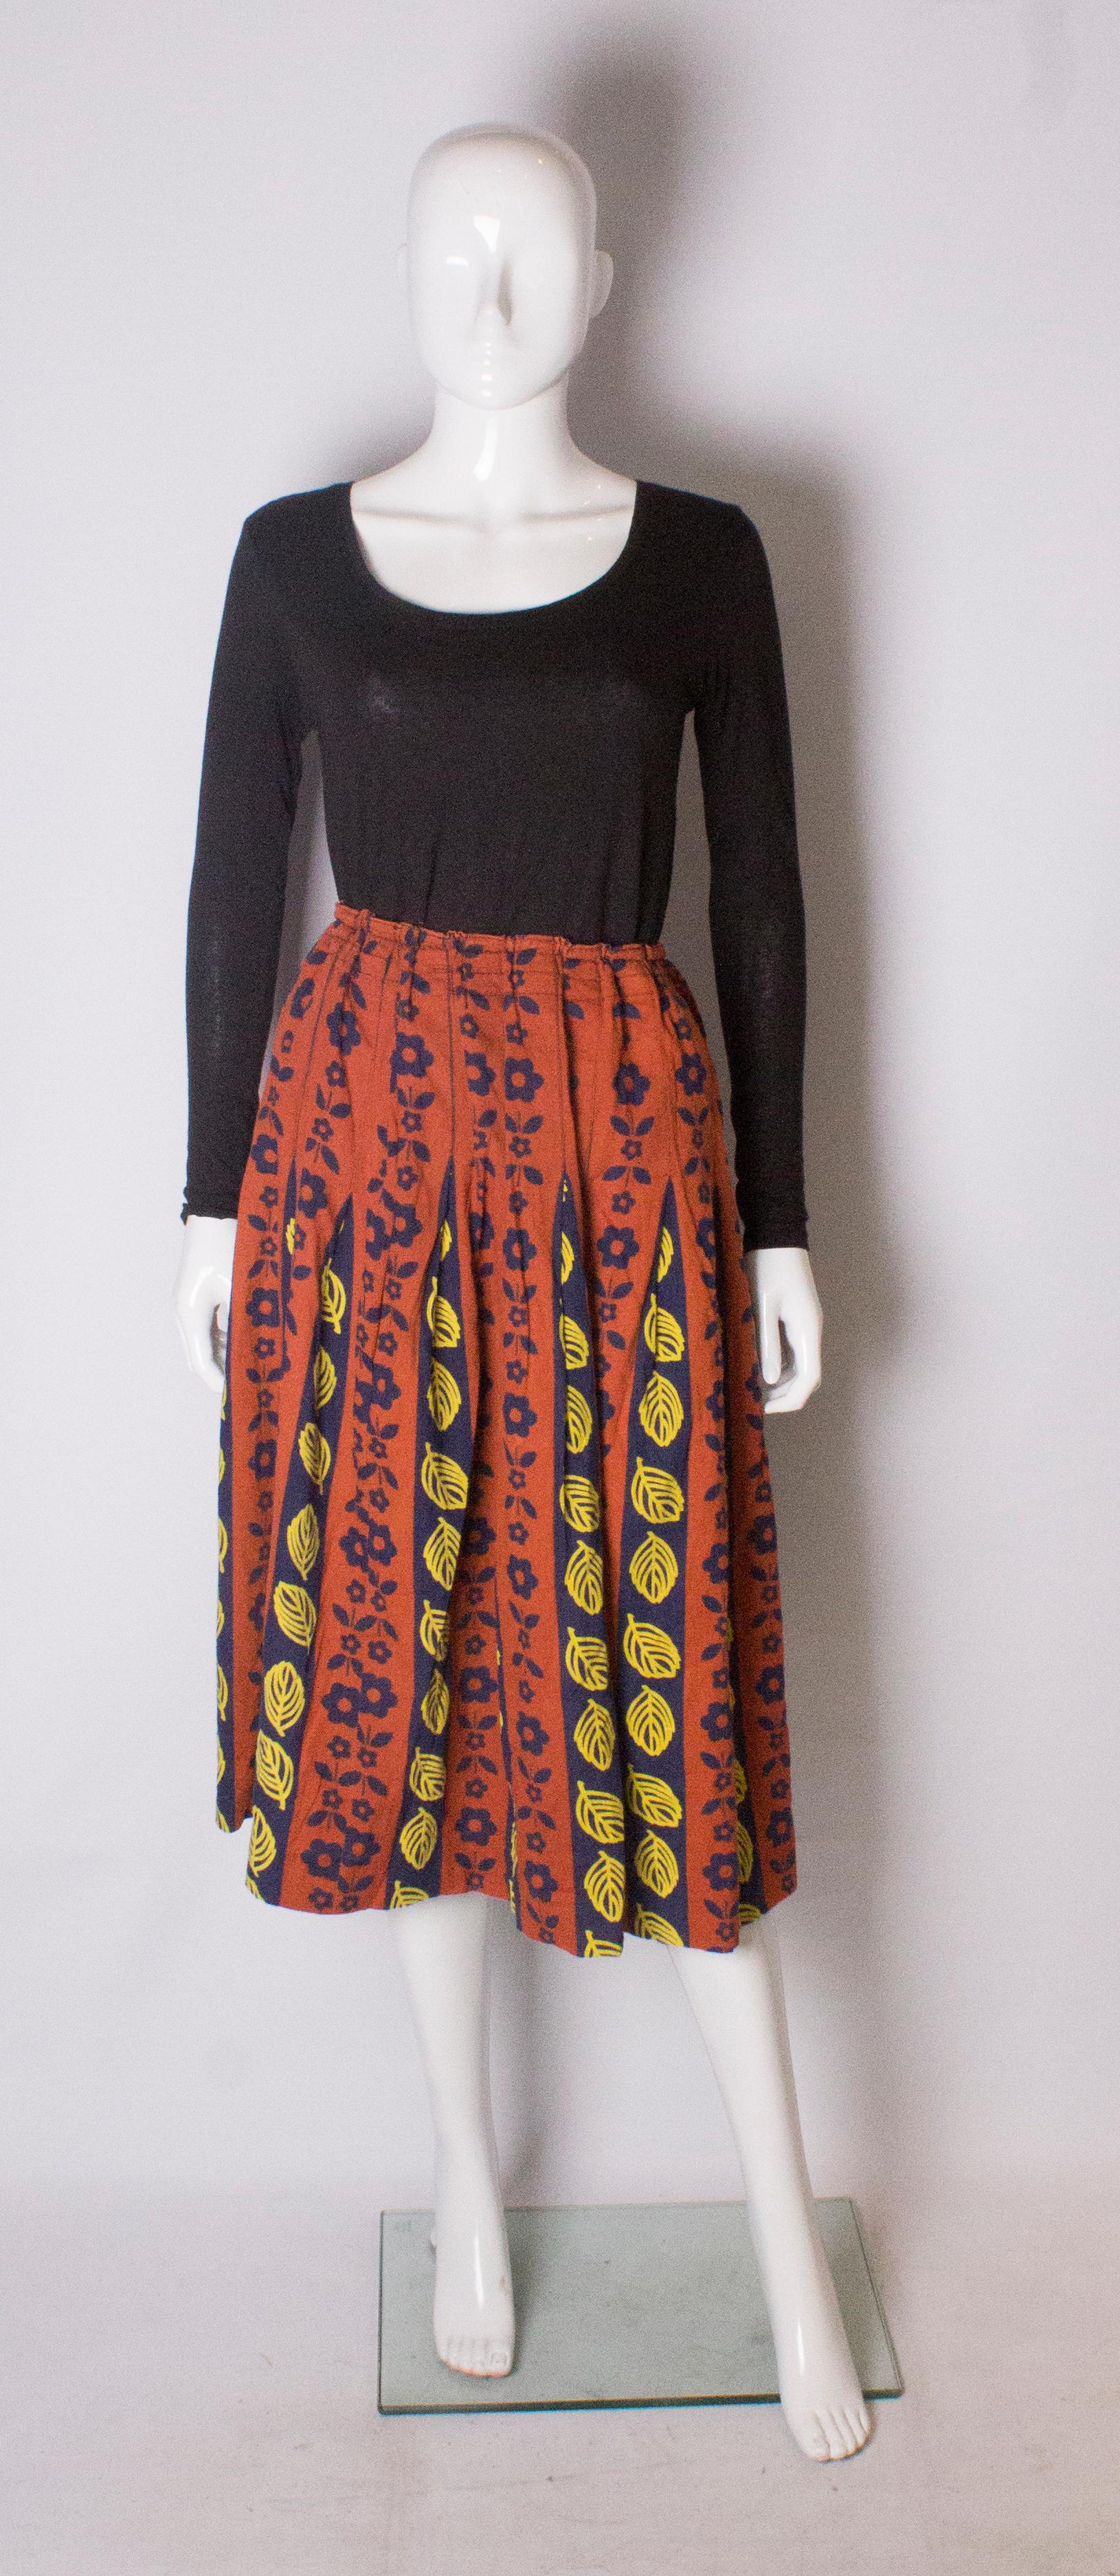 A lovely skirt for Autumn/Fall The skirt is made of a heavy cotton, with a rust colour background and blue and yellow design. It has an elasticated waist, and so can fit a waist from 28'' to 38'''.